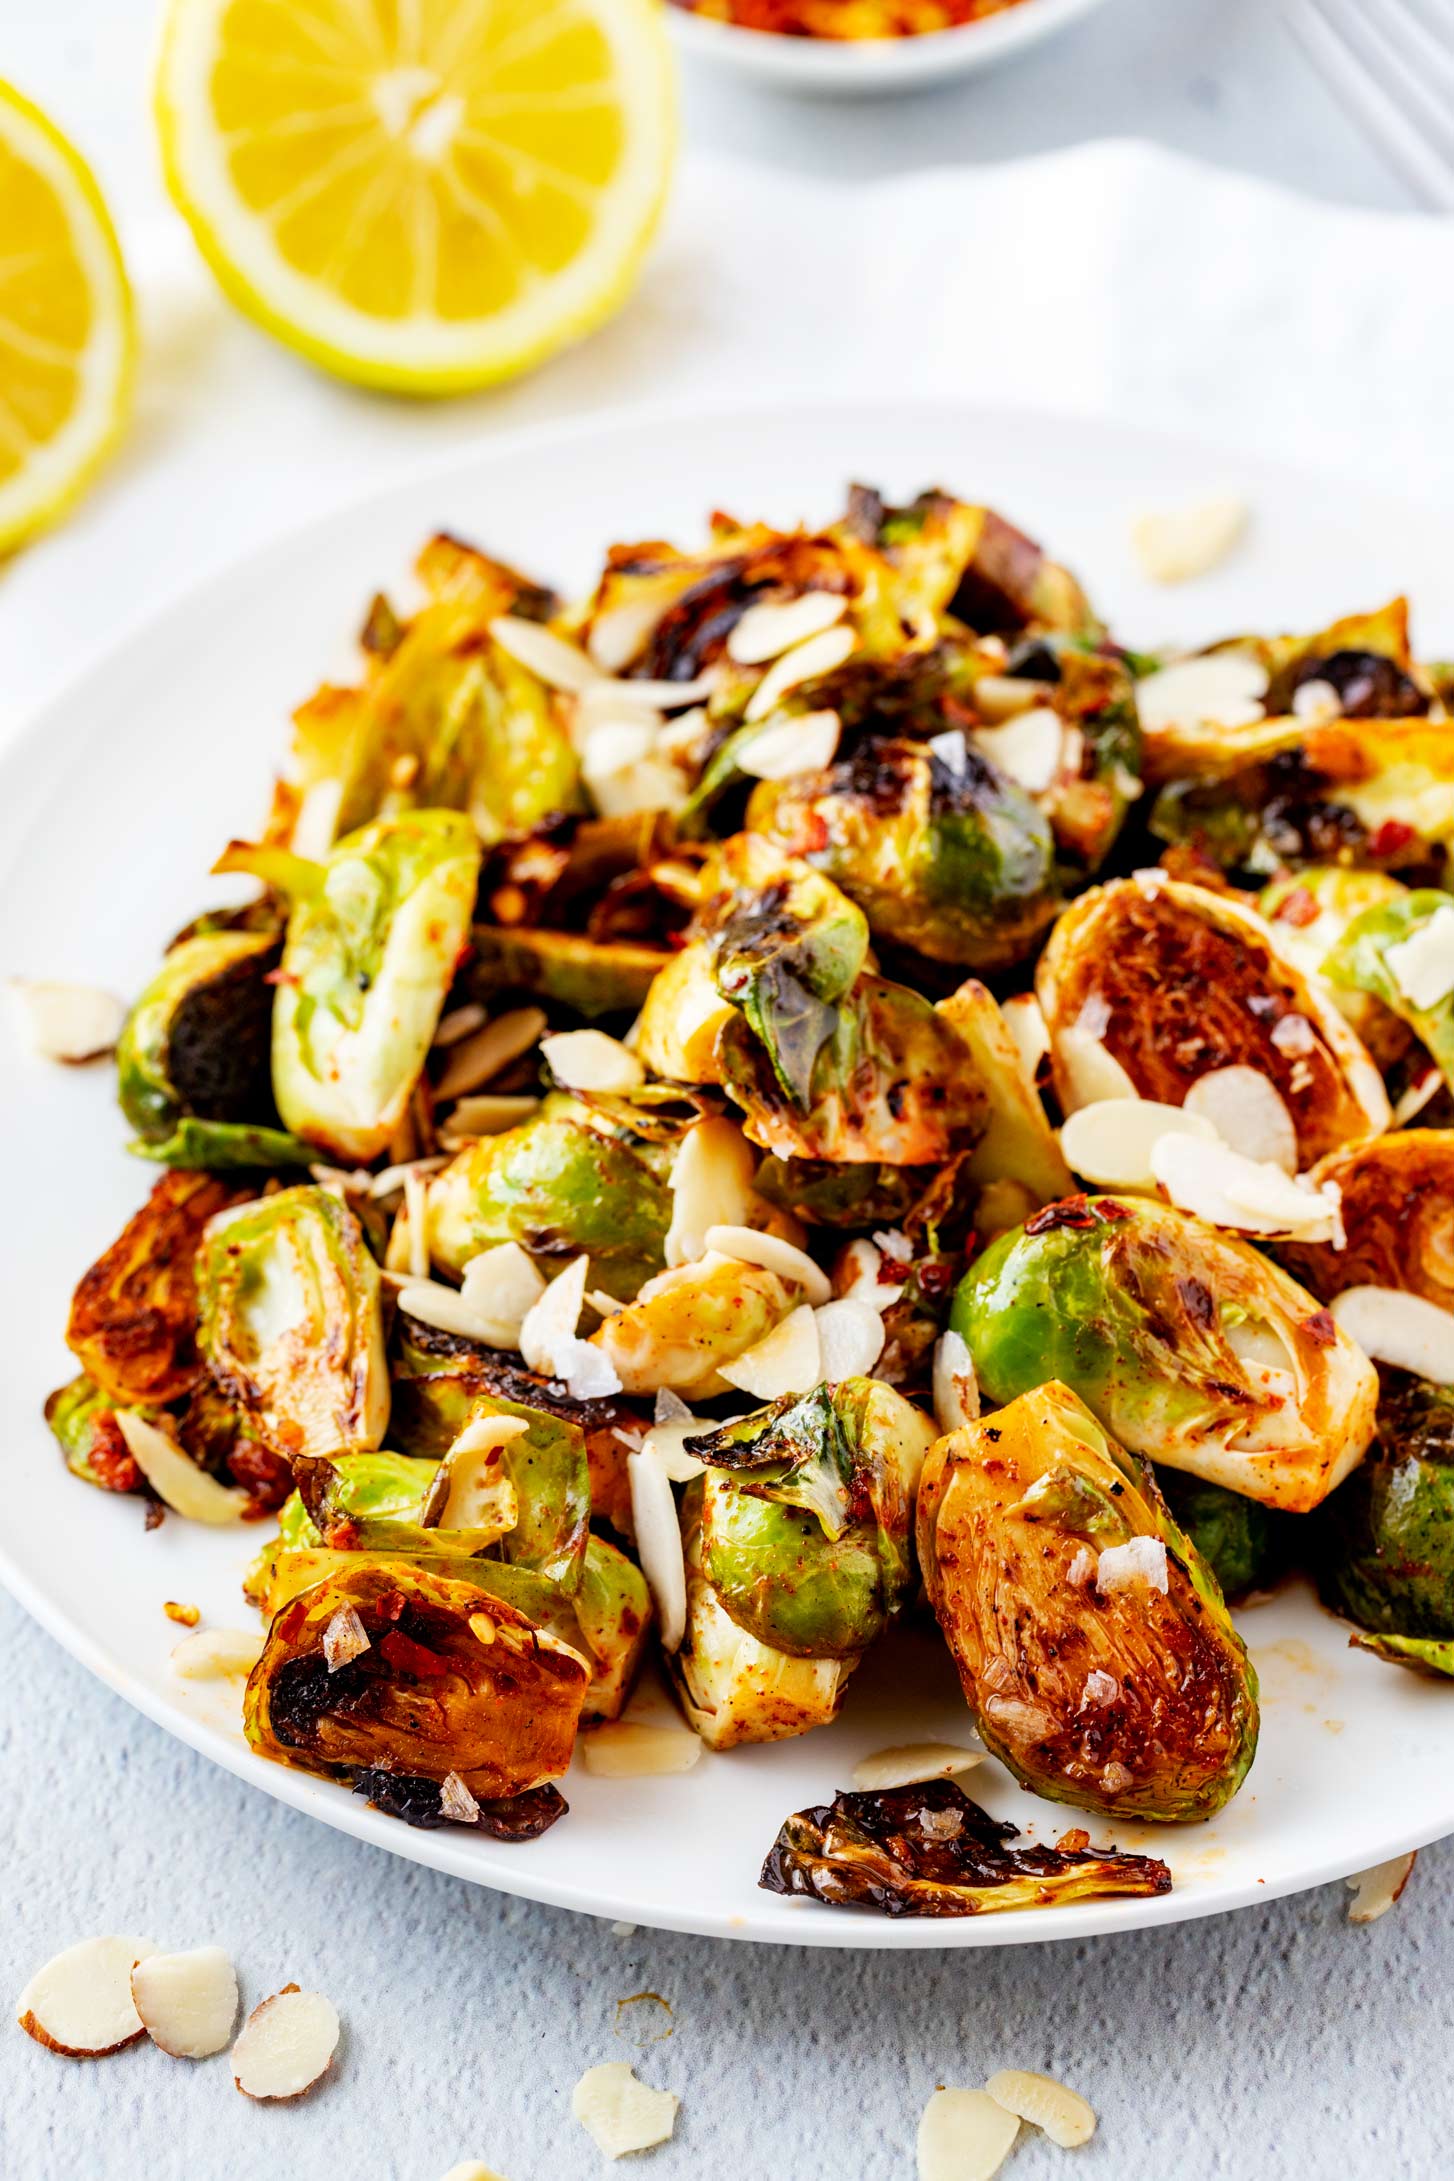 Photo of a white plate of Blackstone Brussels sprouts garnished with almonds.